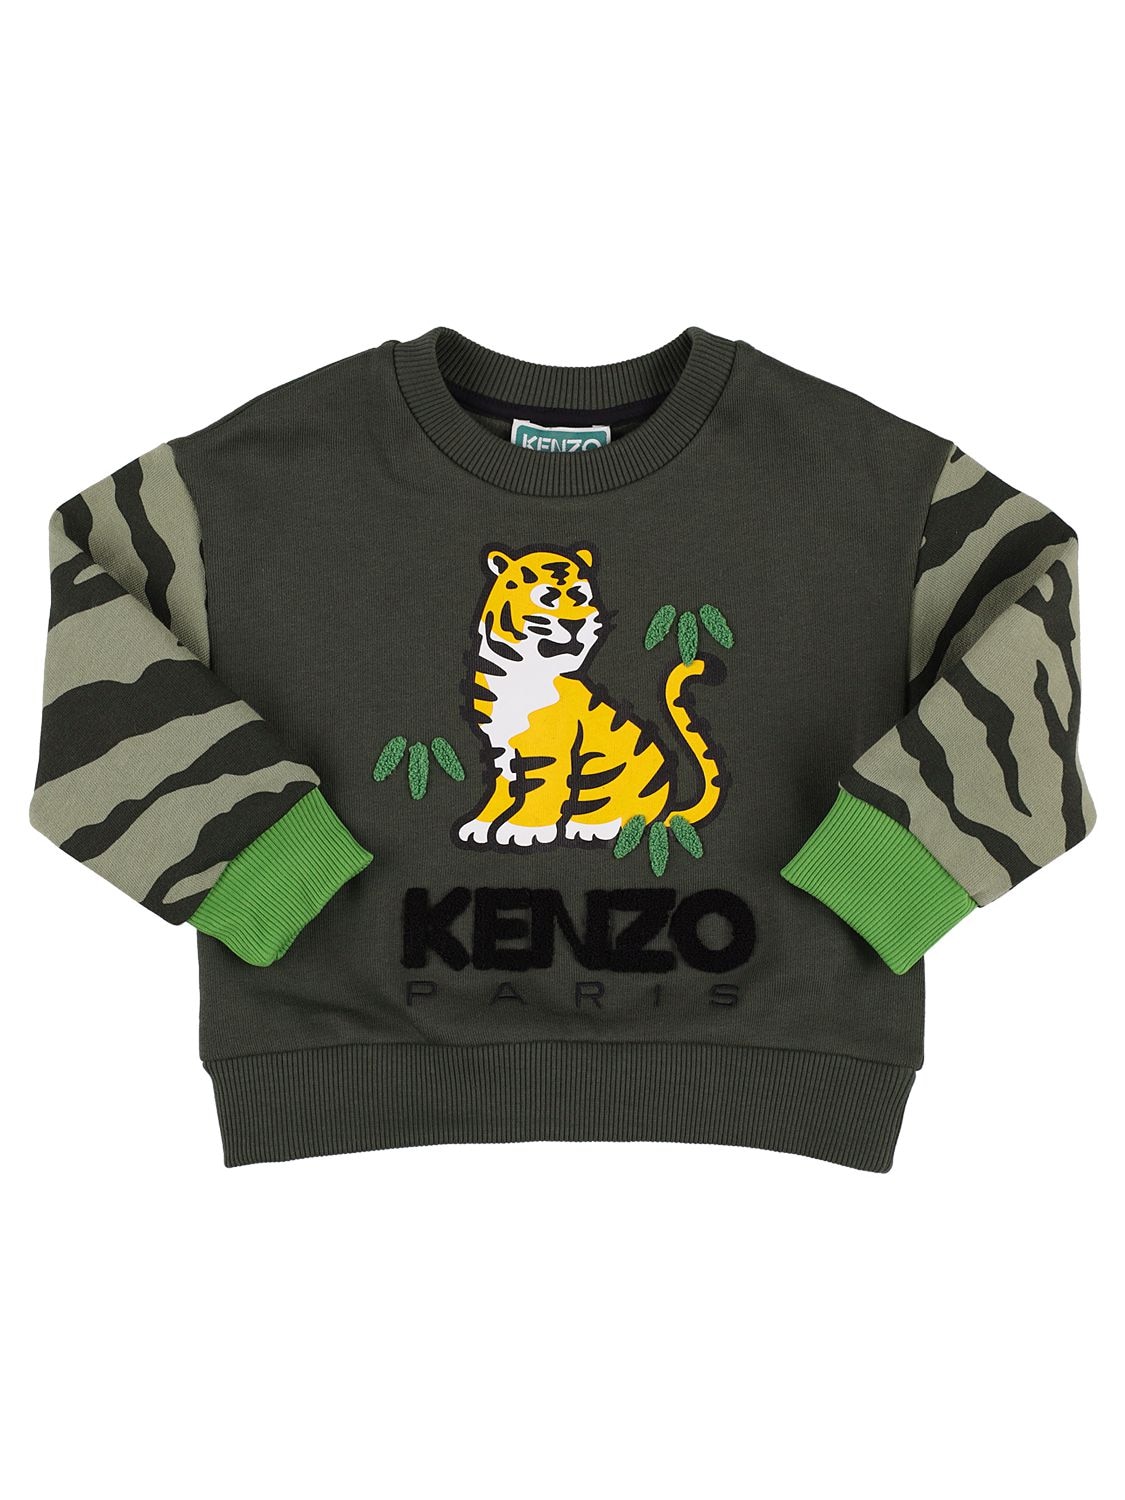 Kenzo Kids' Embroidered & Printed Cotton Sweatshirt In Forest Green